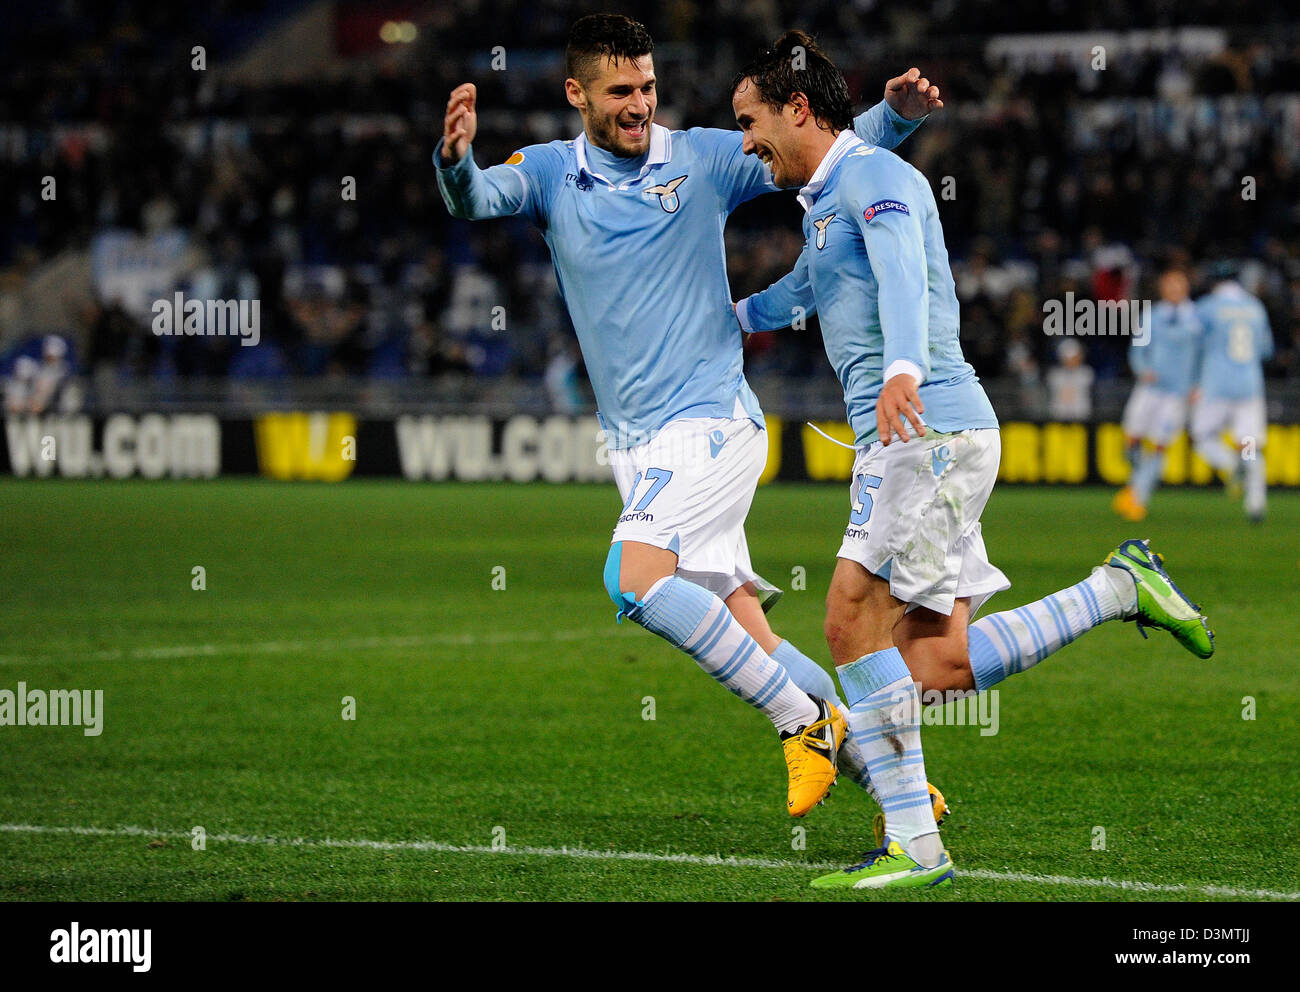 Rome, Italy. 21st February 2013. Lazio's Alvaro Gonzalez (R) celebrates with Lorik Cana after scoring the 2-0 during the UEFA Europa League Round of 32 second leg soccer match between Lazio Rome and Borussia Moenchengladbach at the Olympic Stadium in Rome, Italy, 21 February 2013. Photo: Marius Becker/dpa /Alamy Live News+++(c) dpa /Alamy Live News- Bildfunk+++ Stock Photo